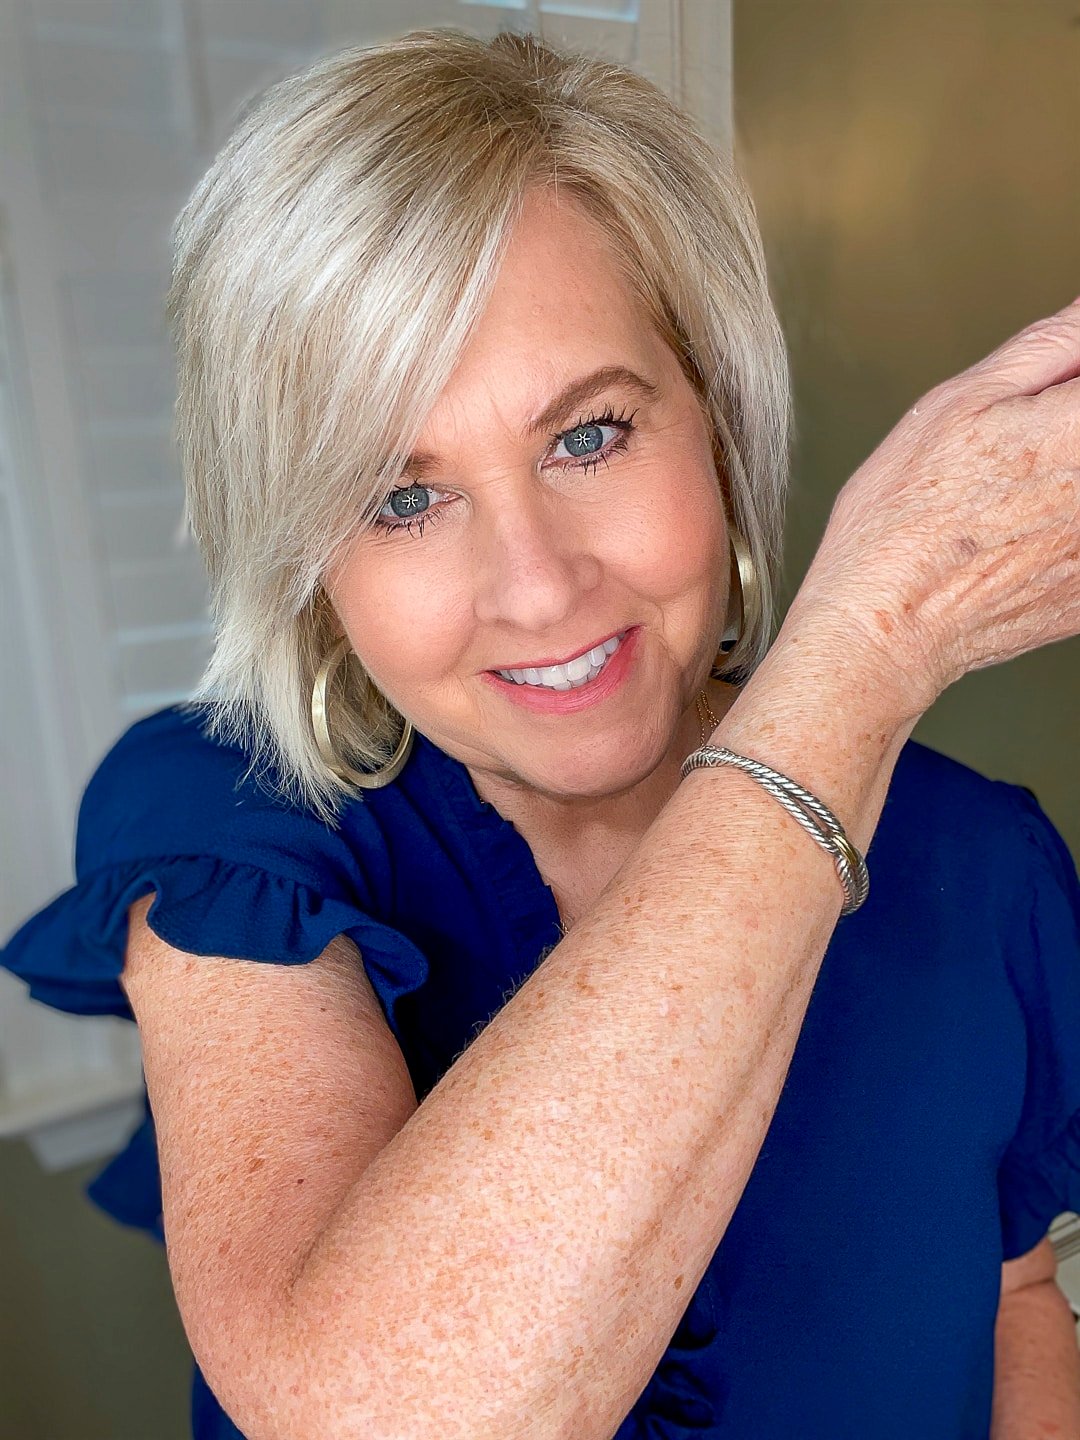 Over 40 Fashion Blogger, Tania Stephens is wearing a blue top and trying City Beauty's Inviscrepe Body Balm 7